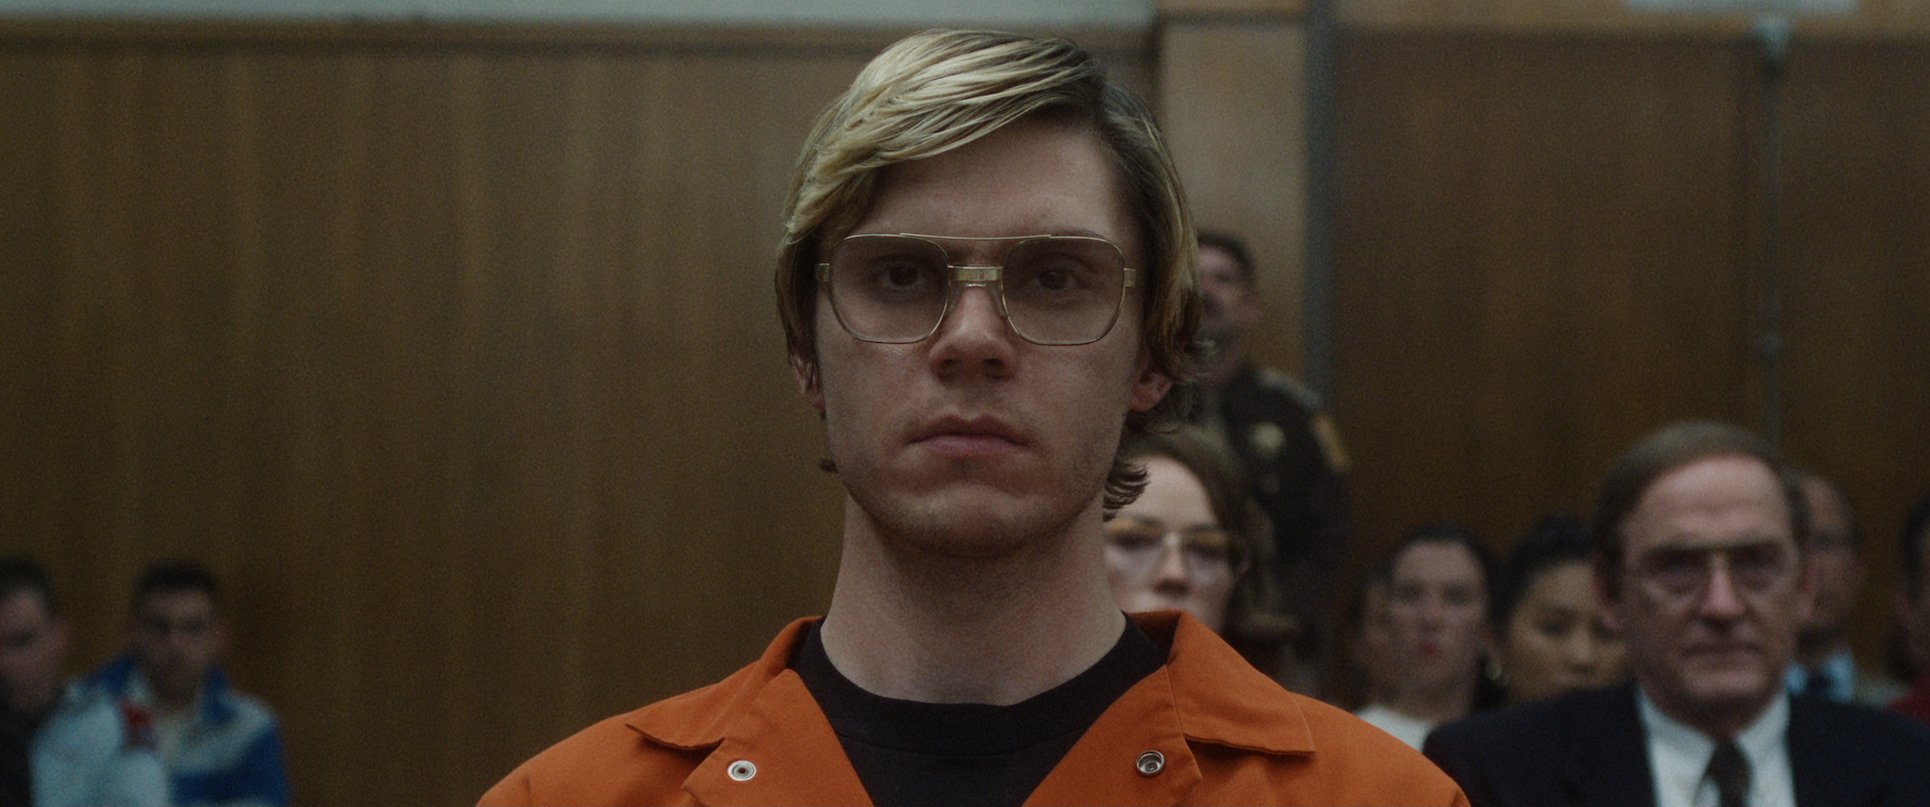 netflix dahmer how accurate